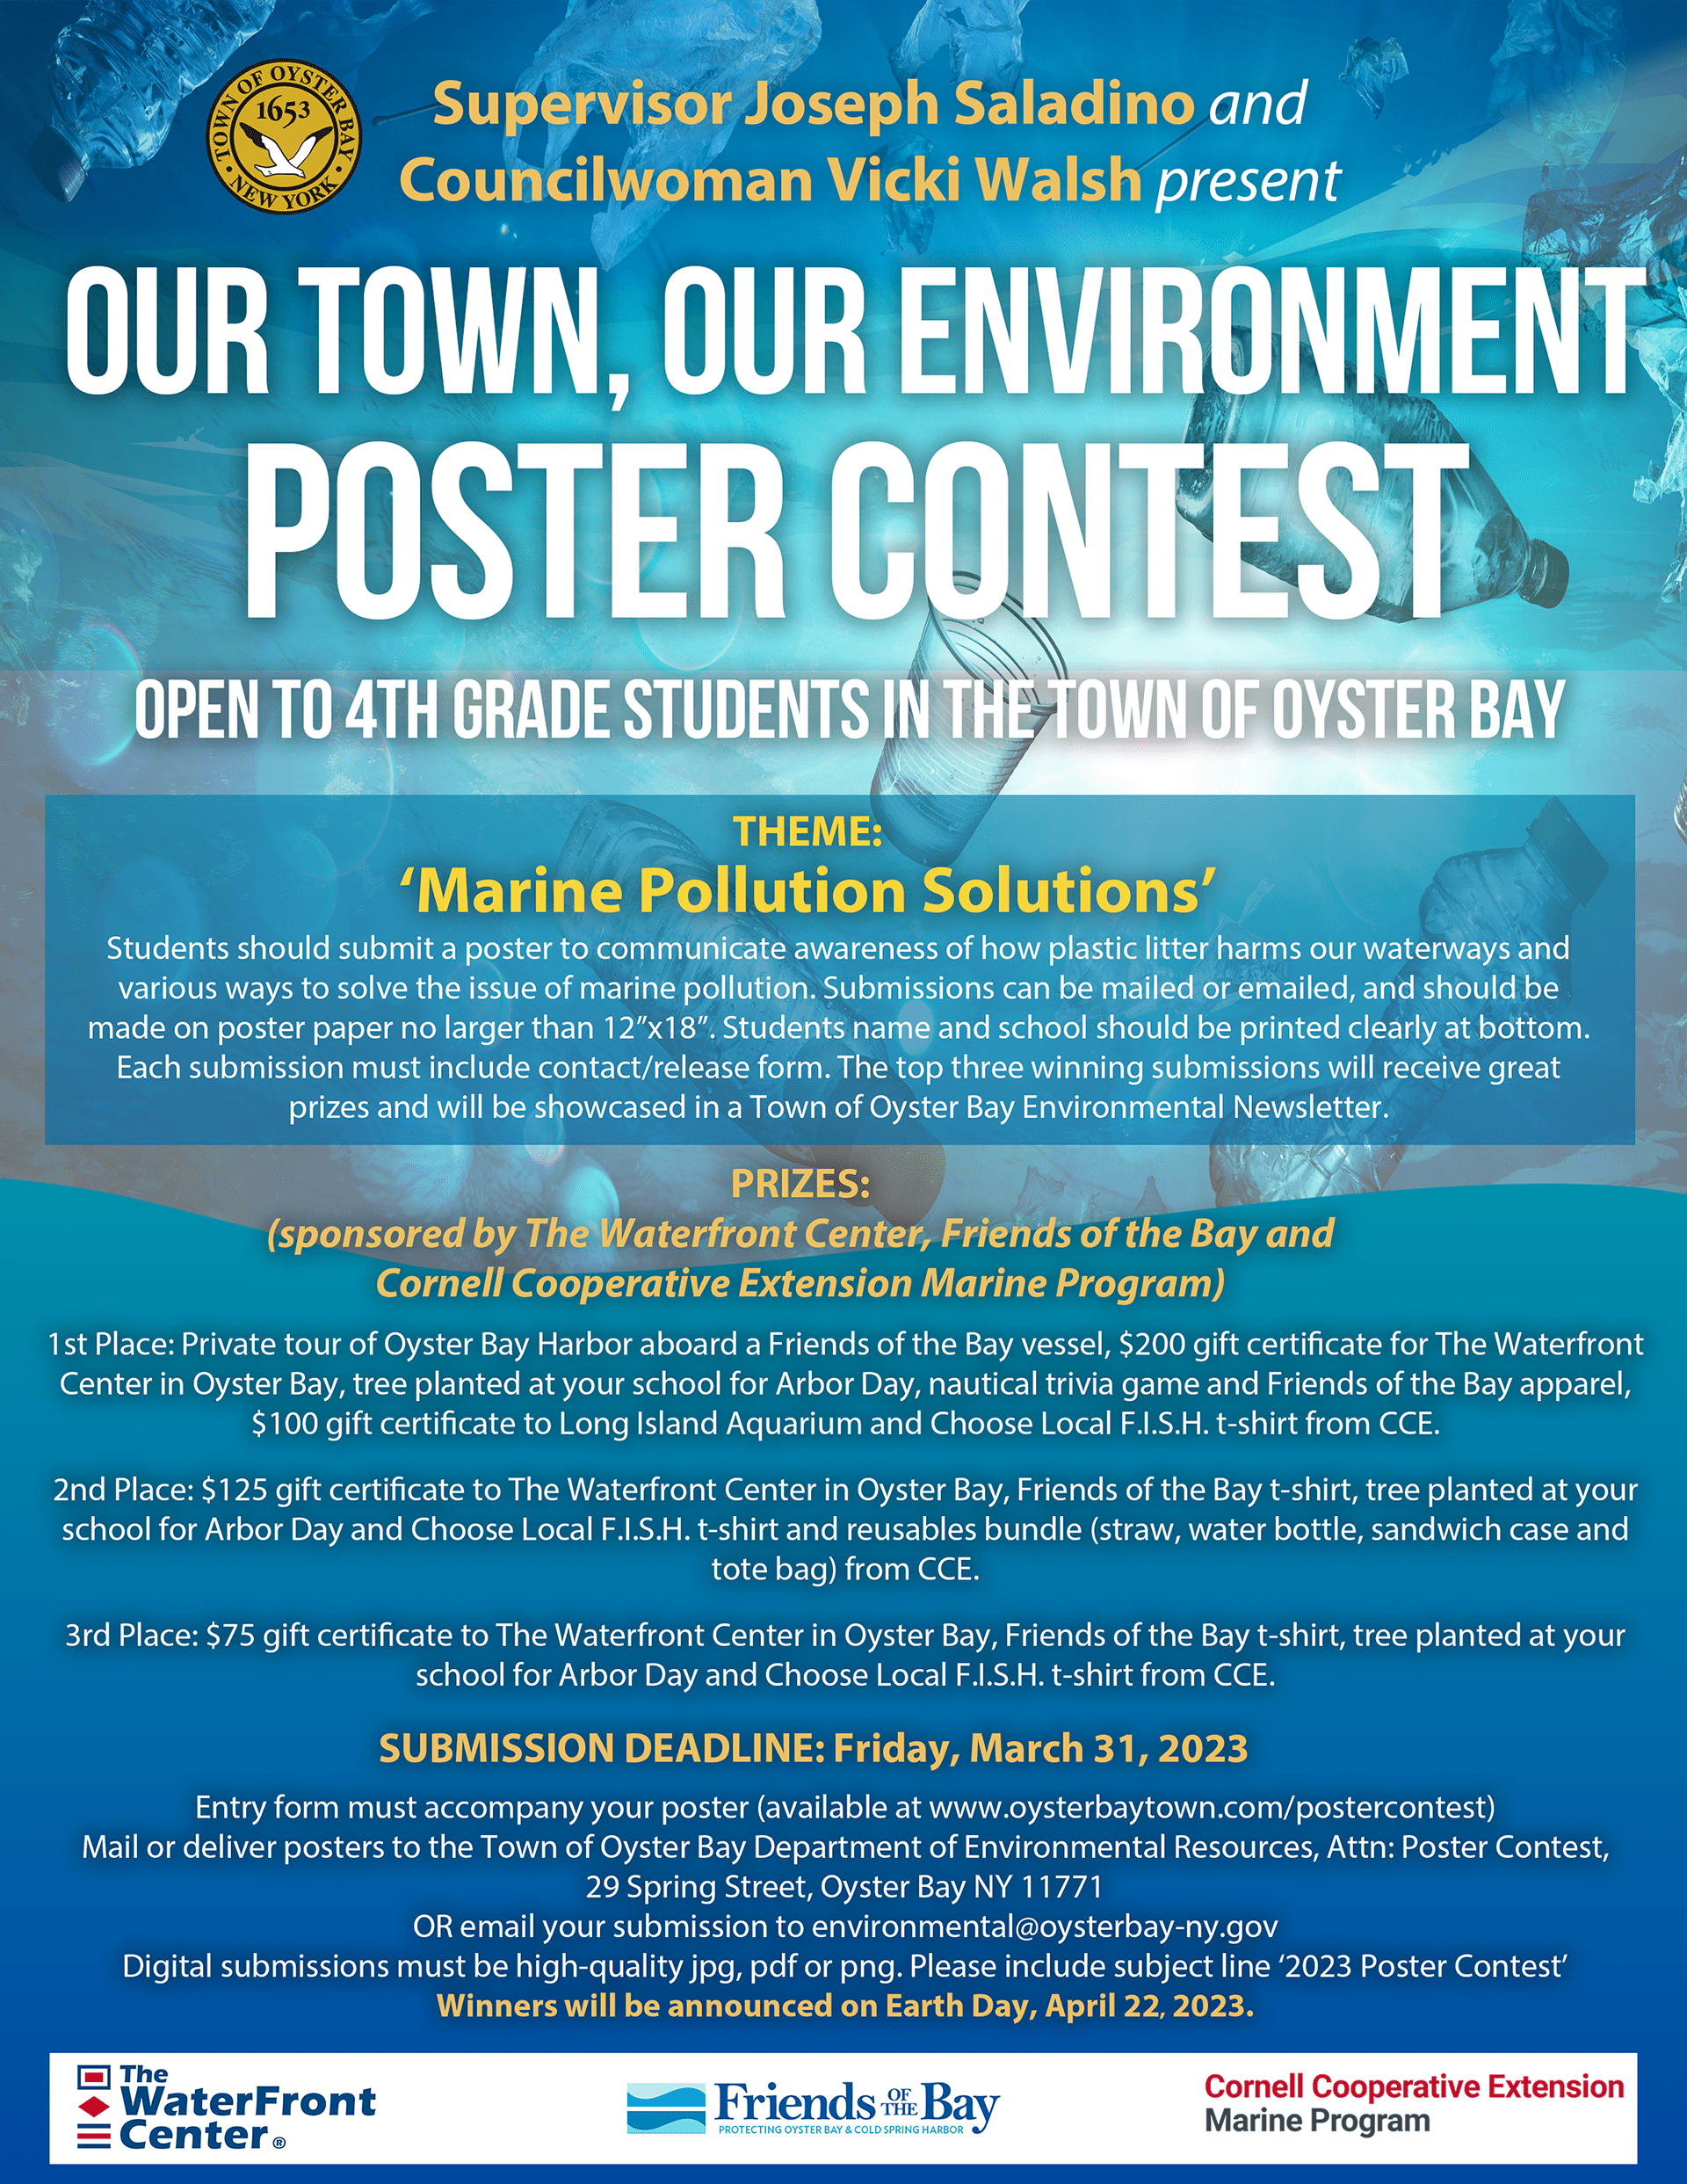 Town Announces Environmental Poster Contest For 4th Grade Students